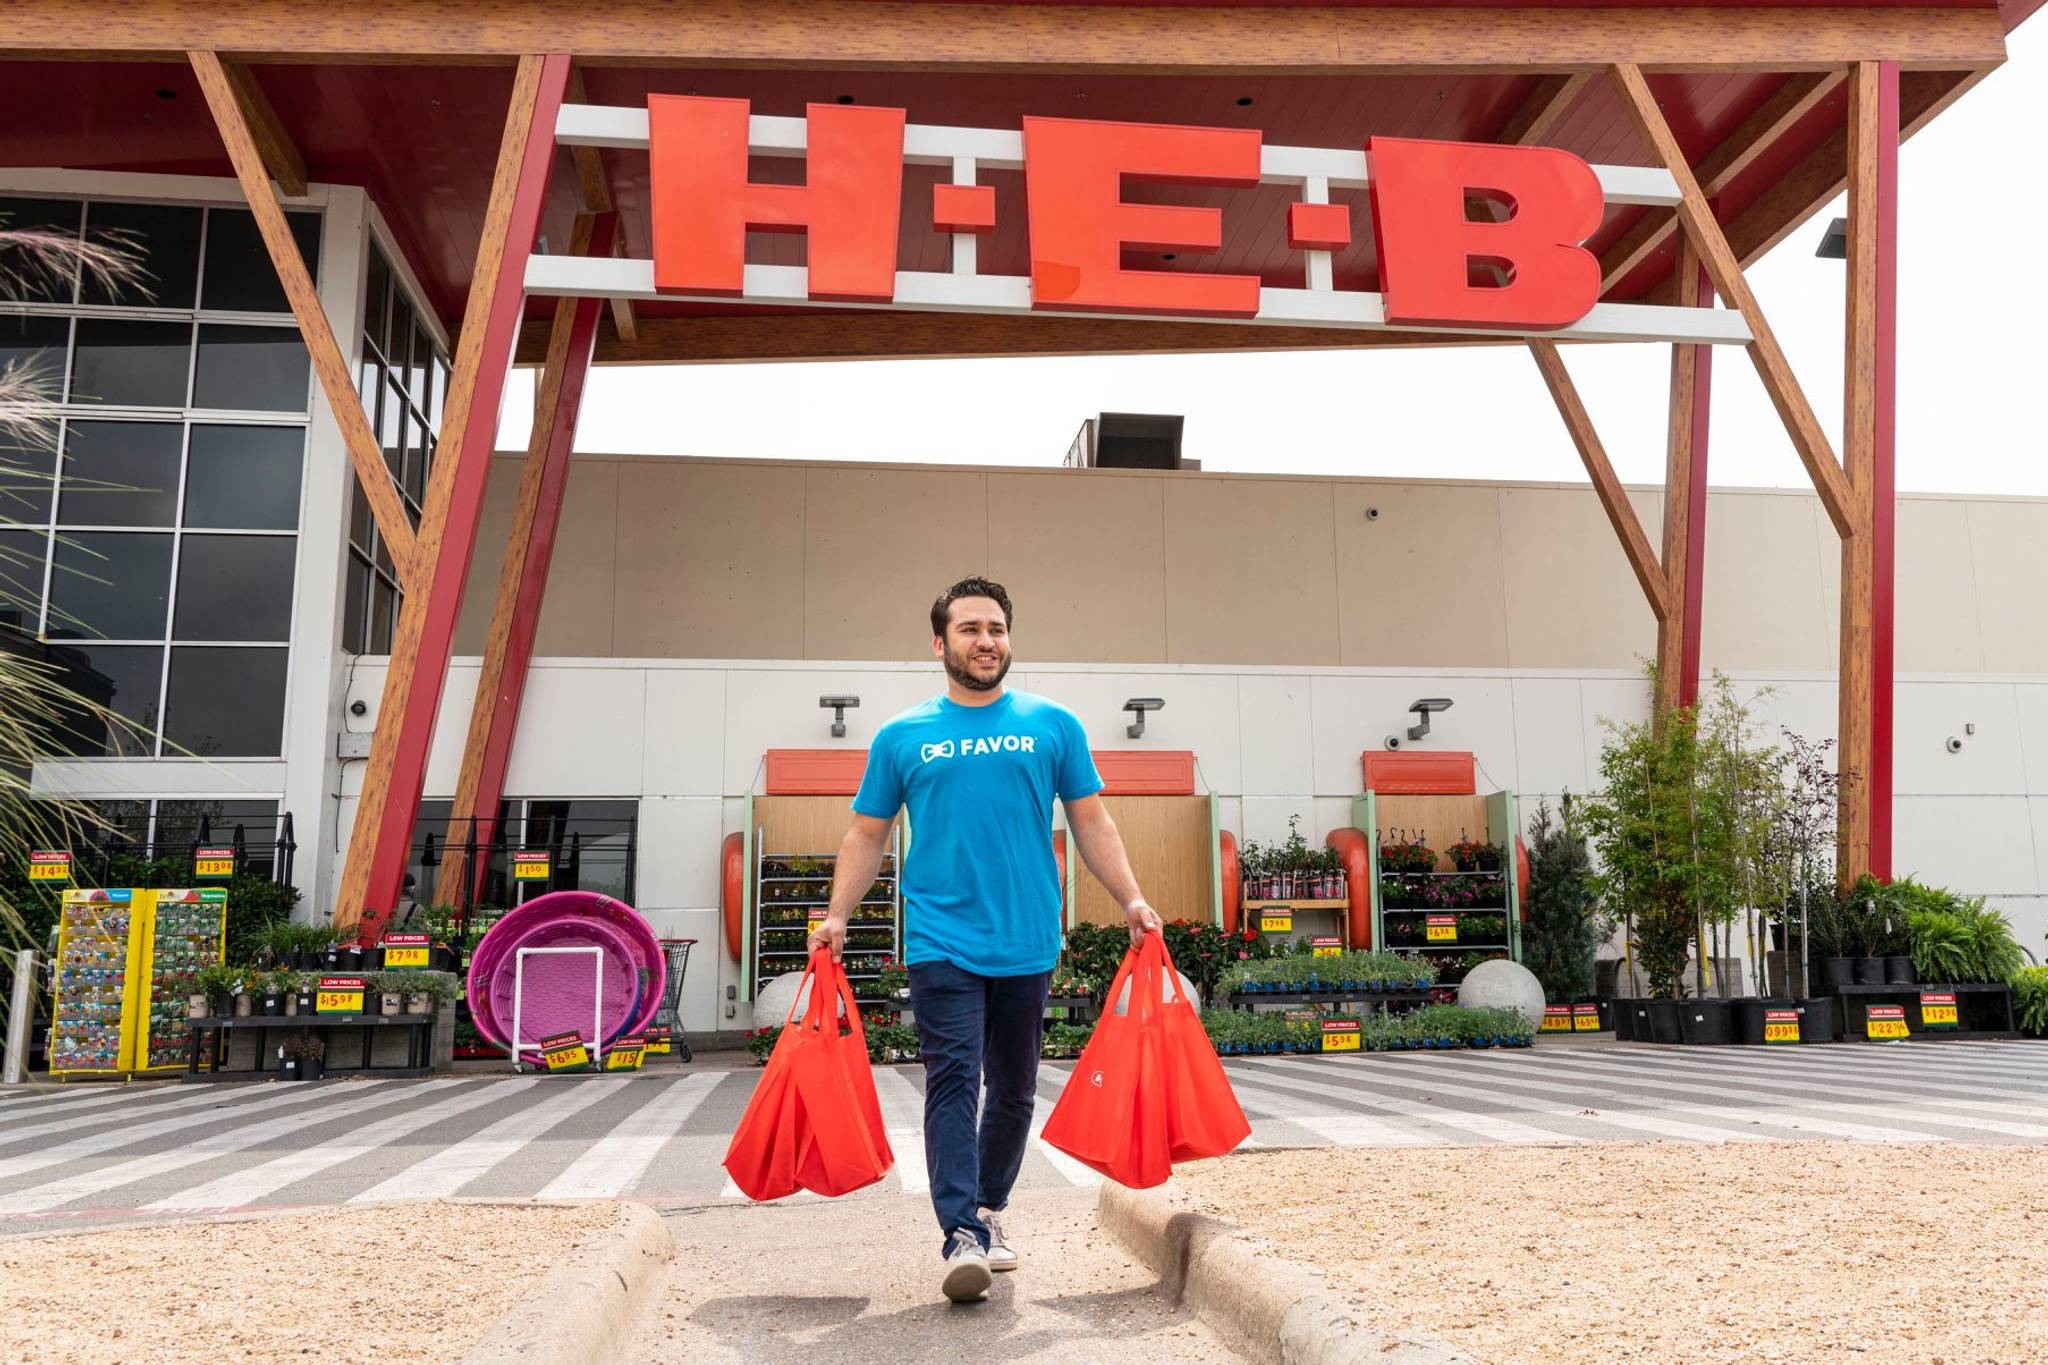 What do Middle Americans want from grocery stores?